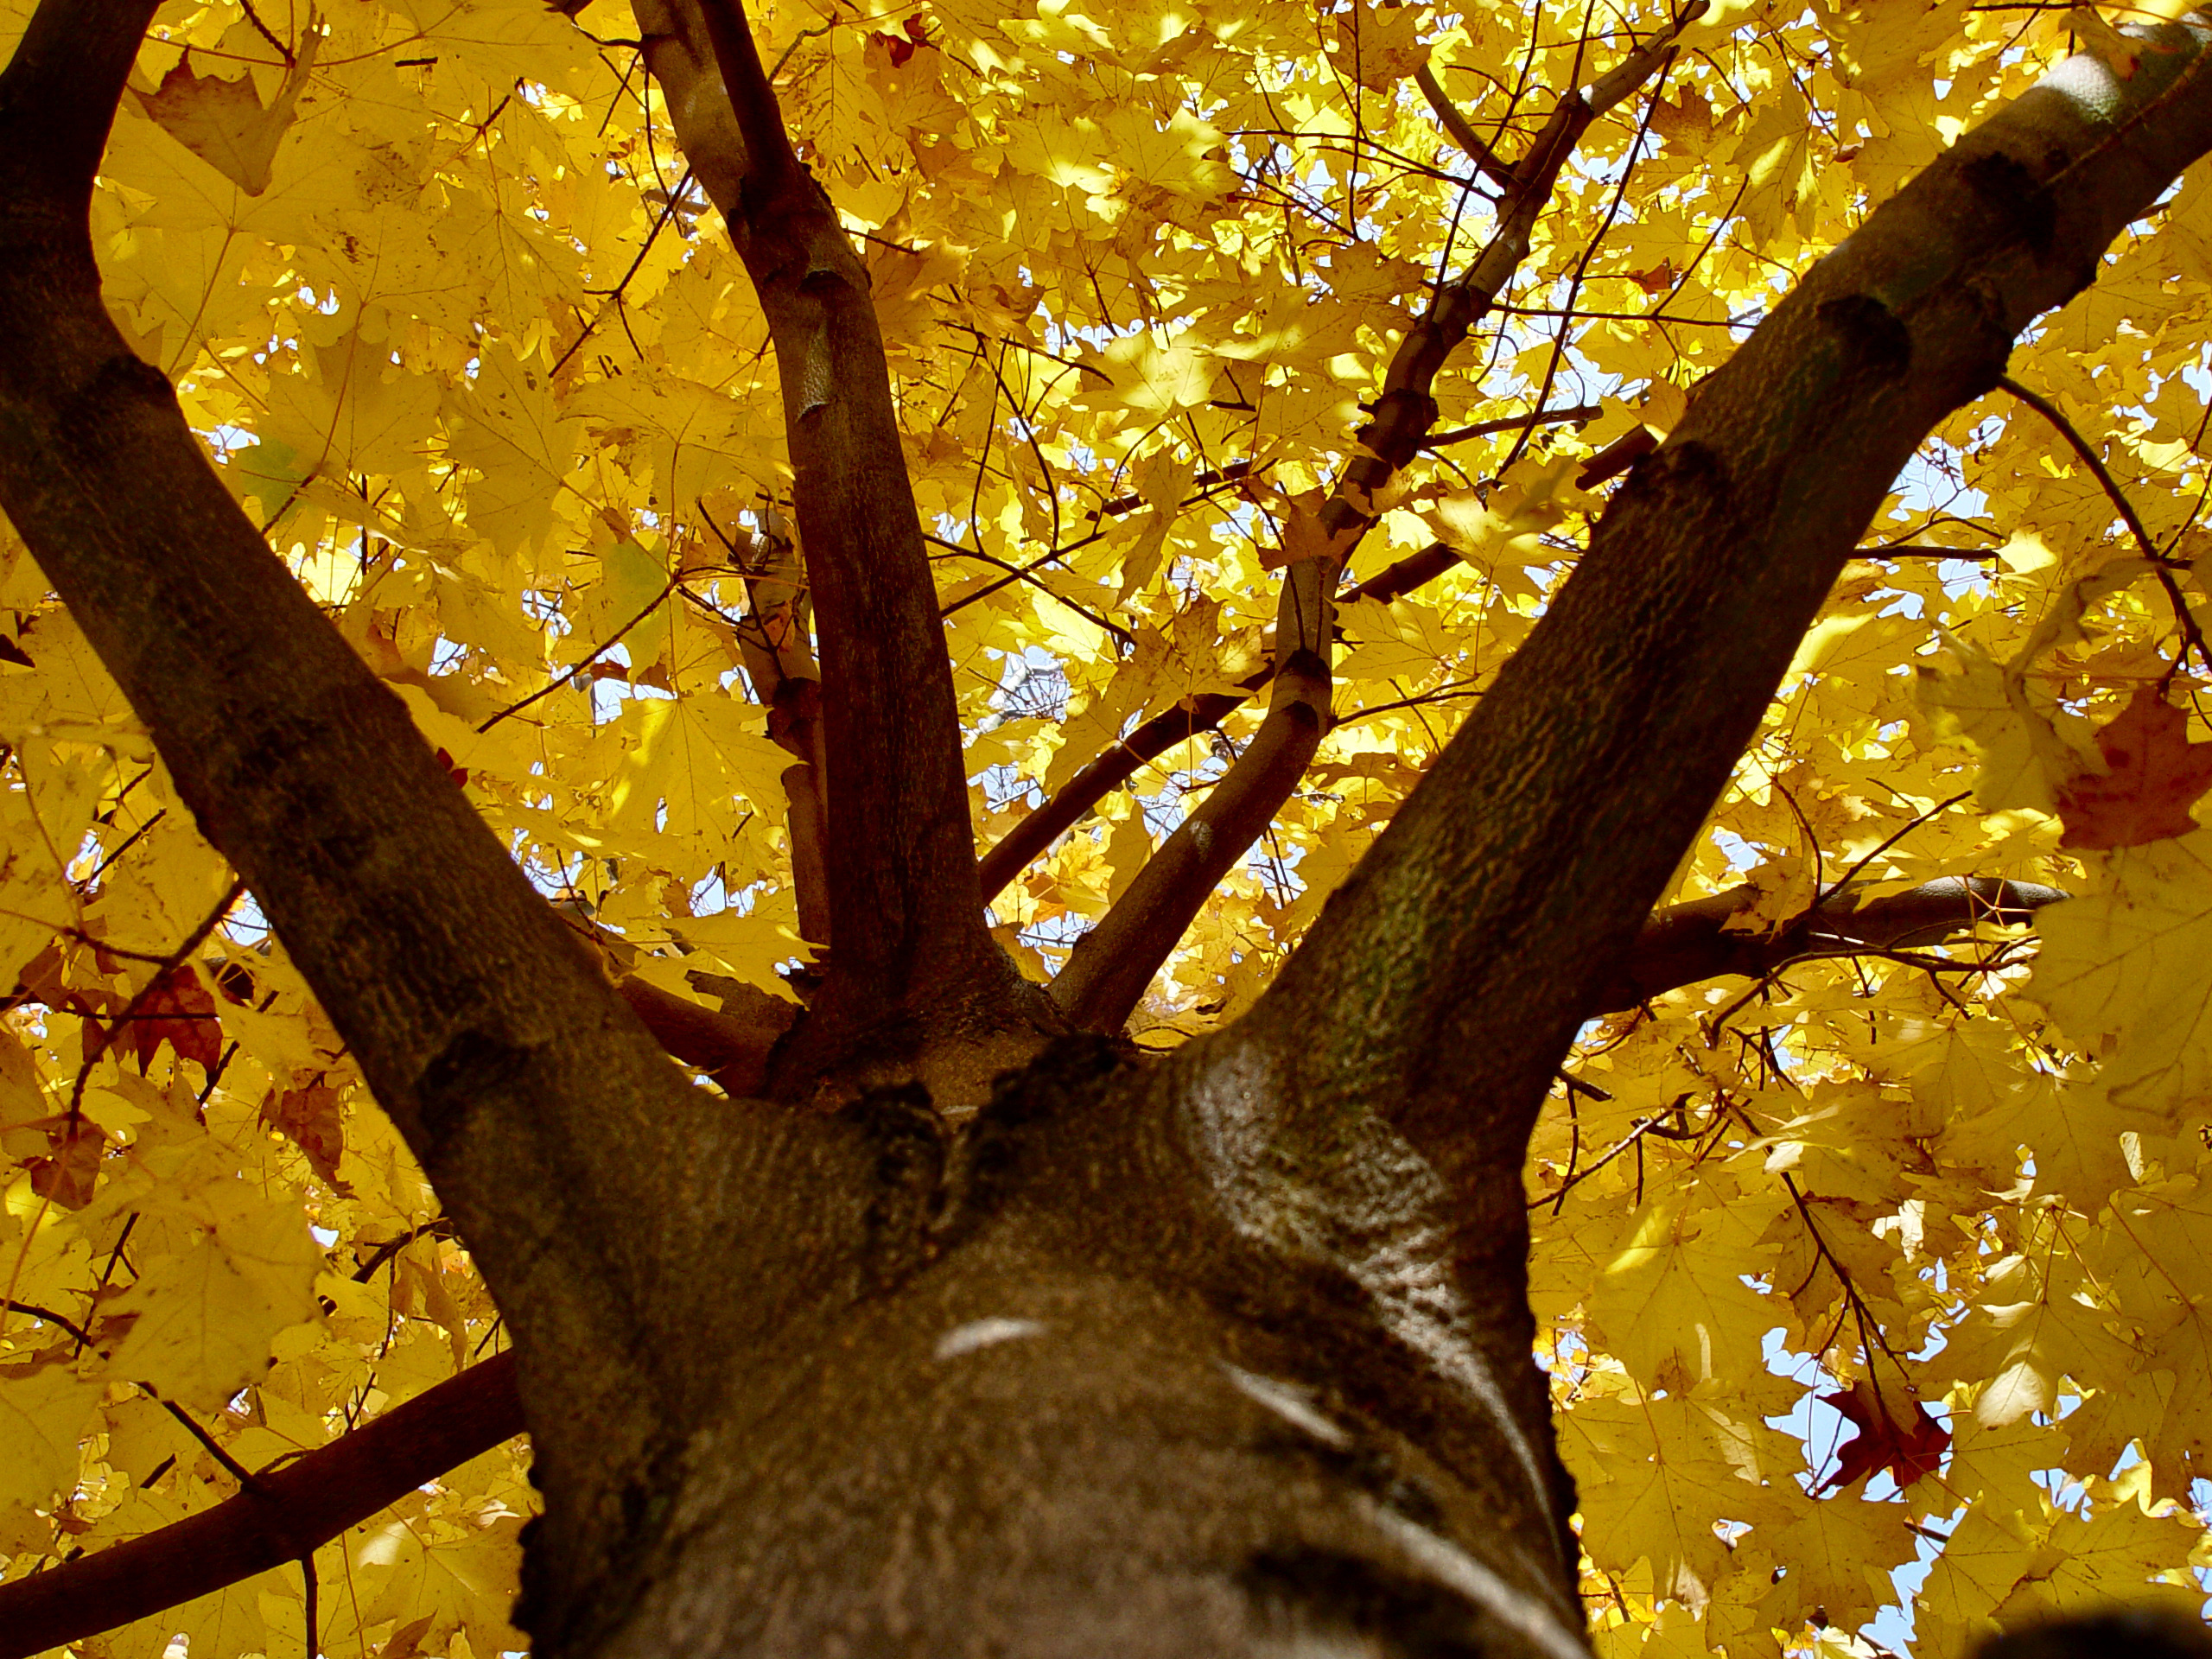 Looking up into a Norway Maple Acer platanoides bursting with autumn colors